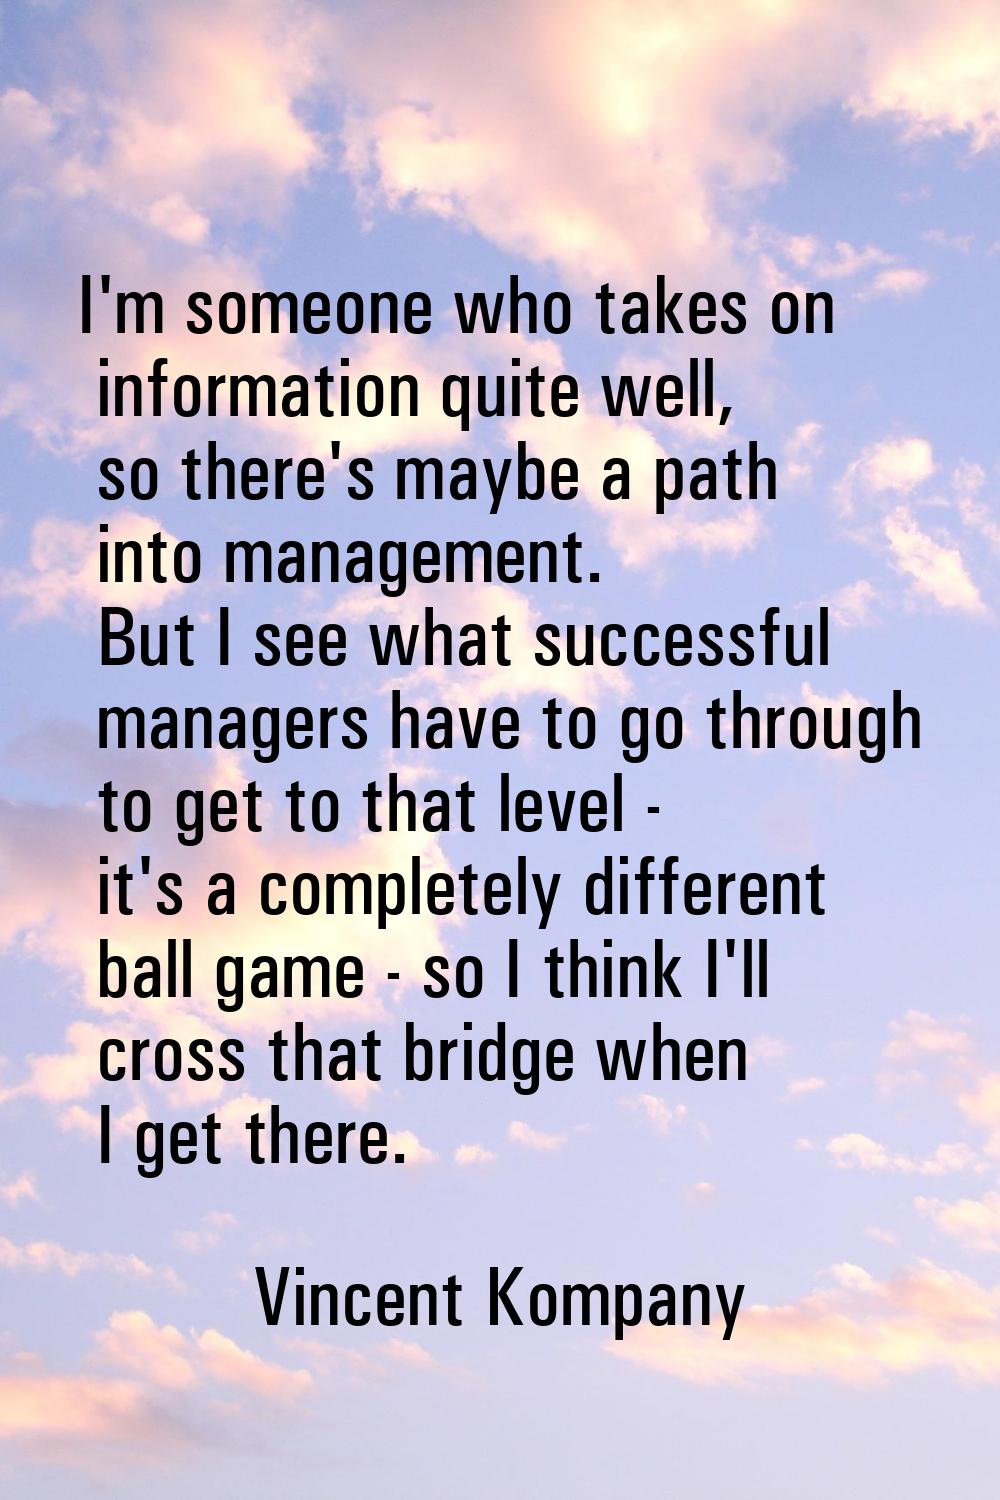 I'm someone who takes on information quite well, so there's maybe a path into management. But I see